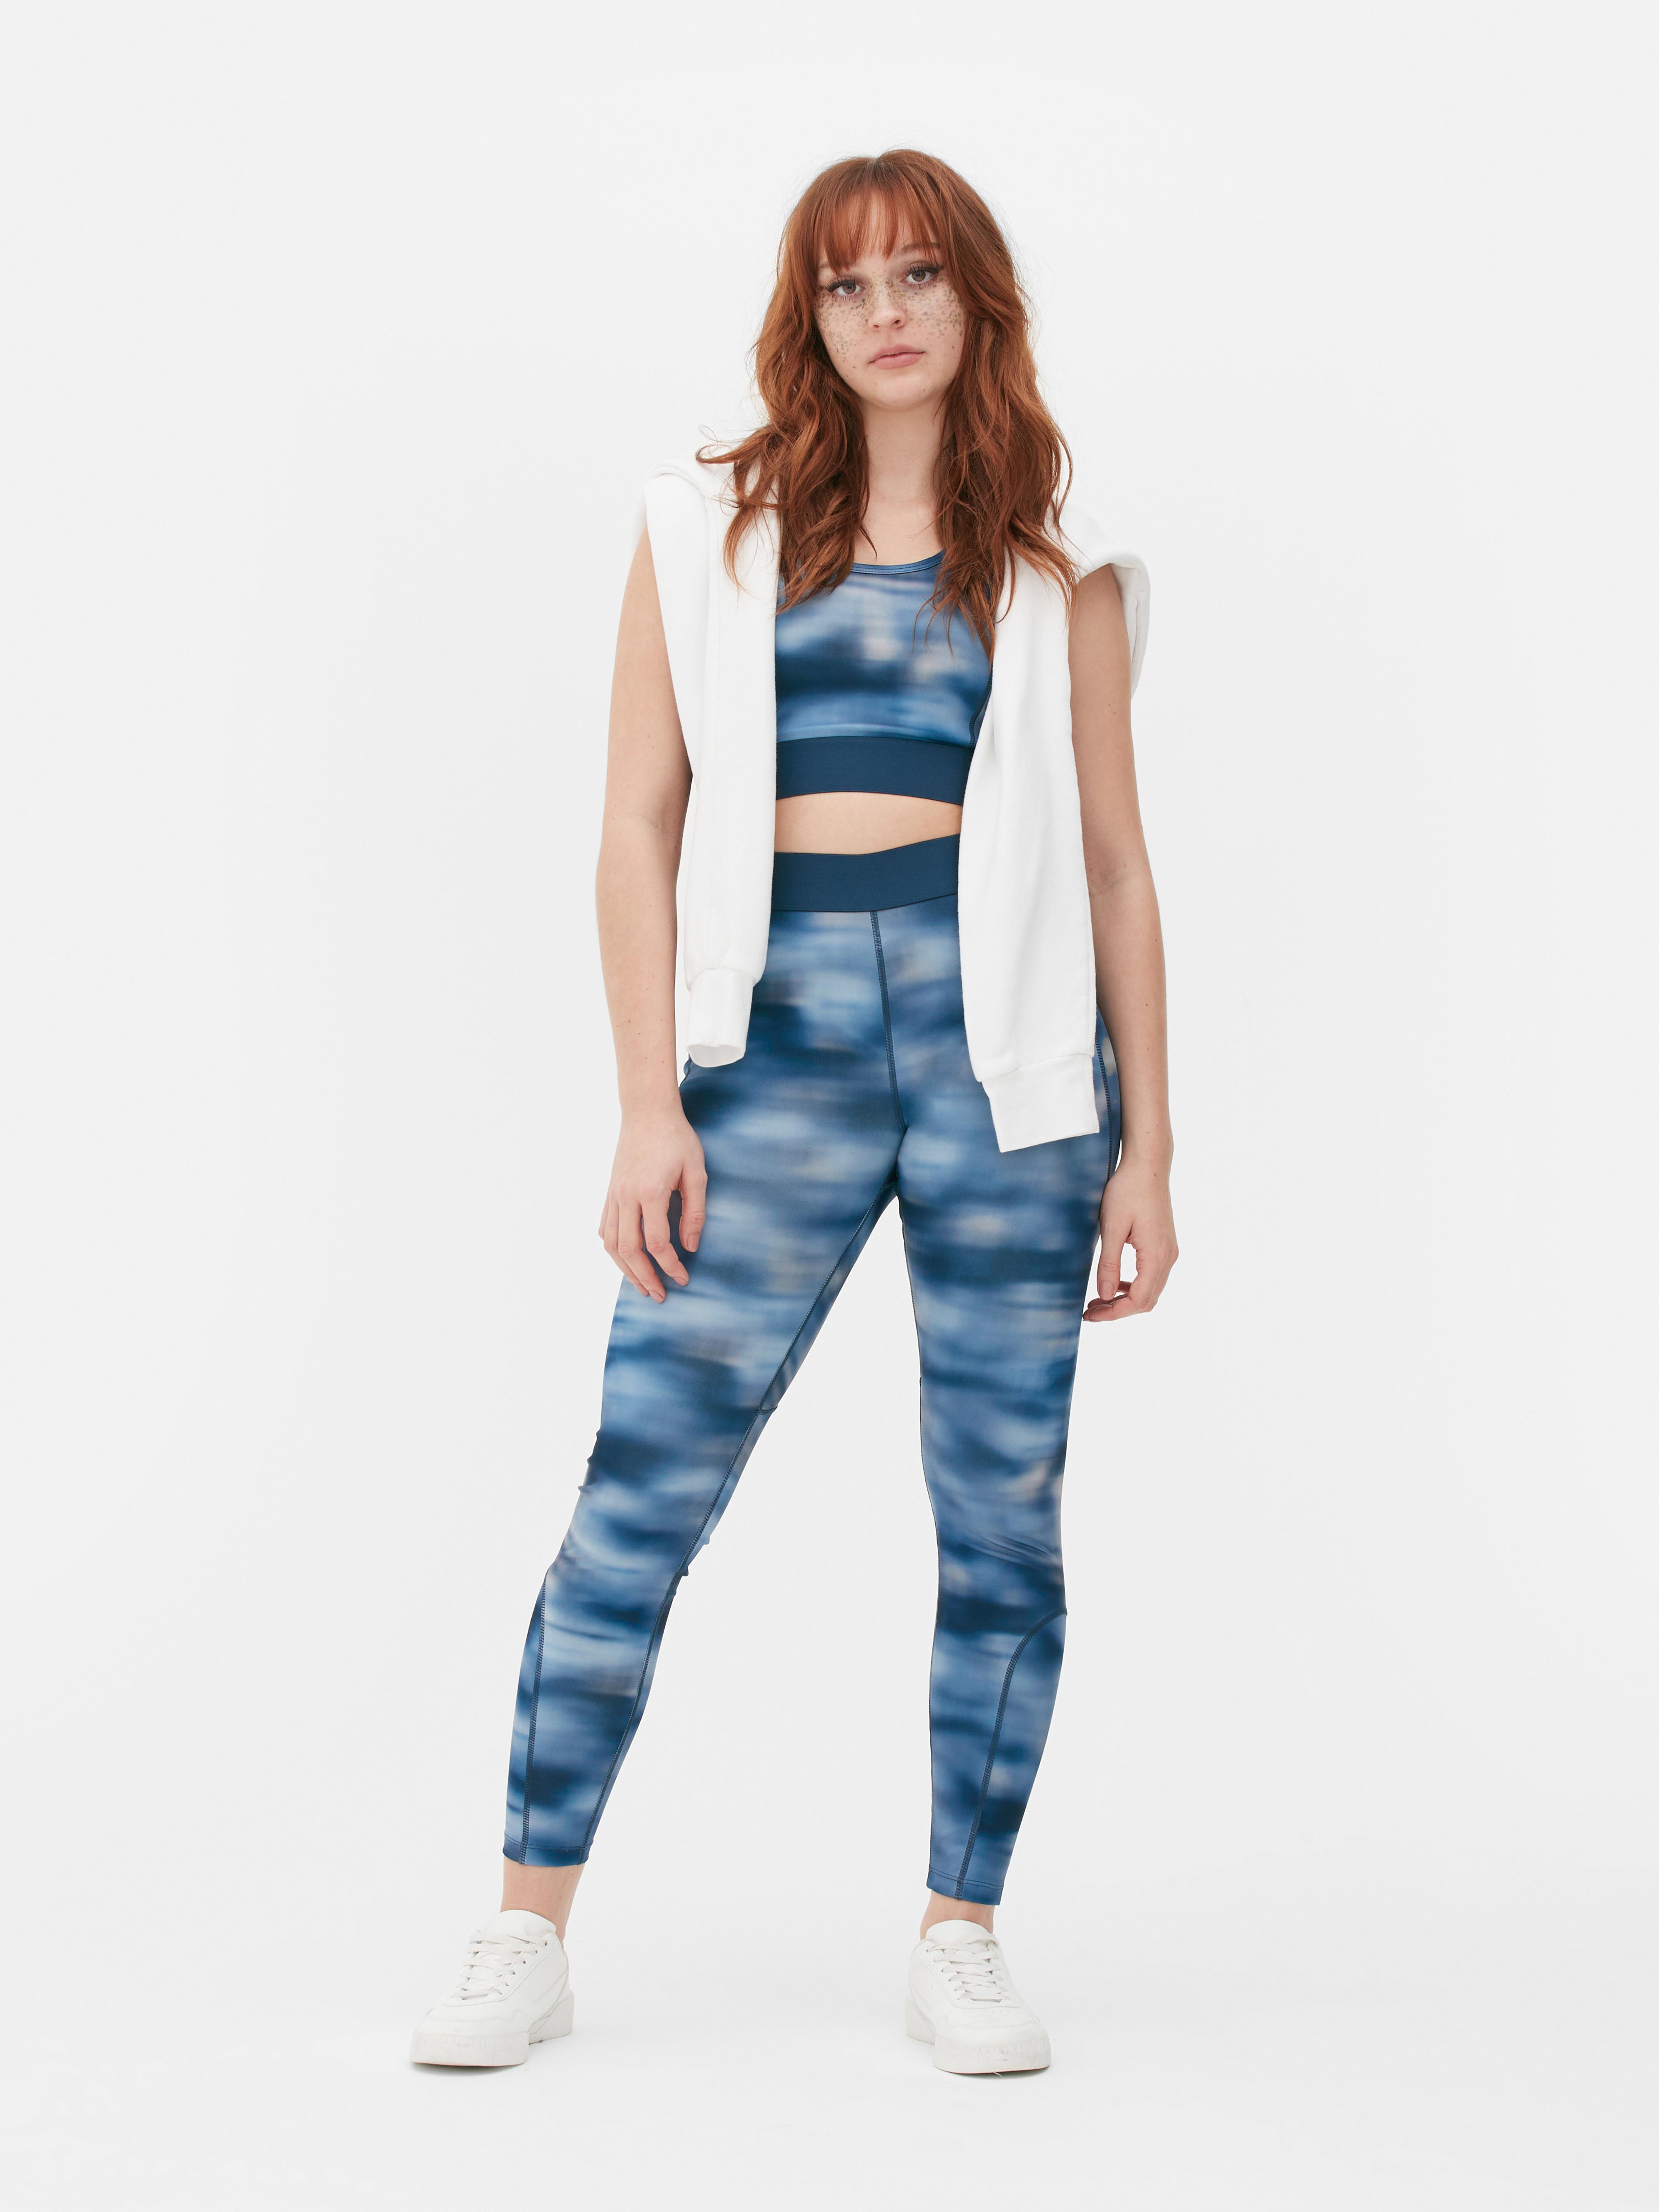 surely Somatic cell Manufacturing Women's Sportswear | Activewear, Gym Clothes & Sets | Primark